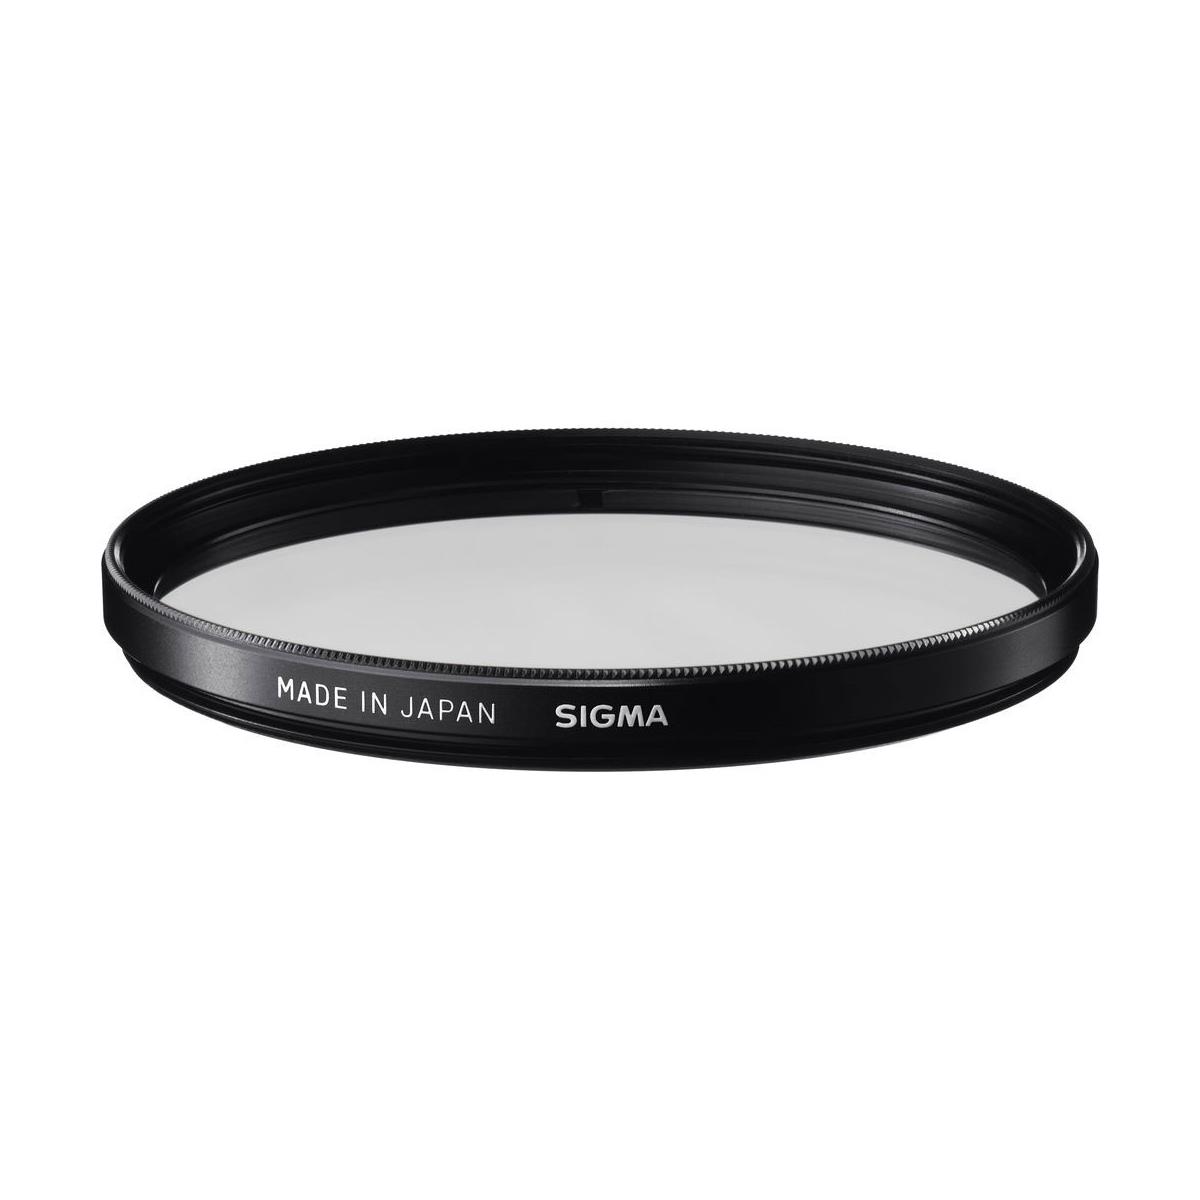 Sigma 52mm WR UV Filter - Water & Oil Repellent & Antistatic